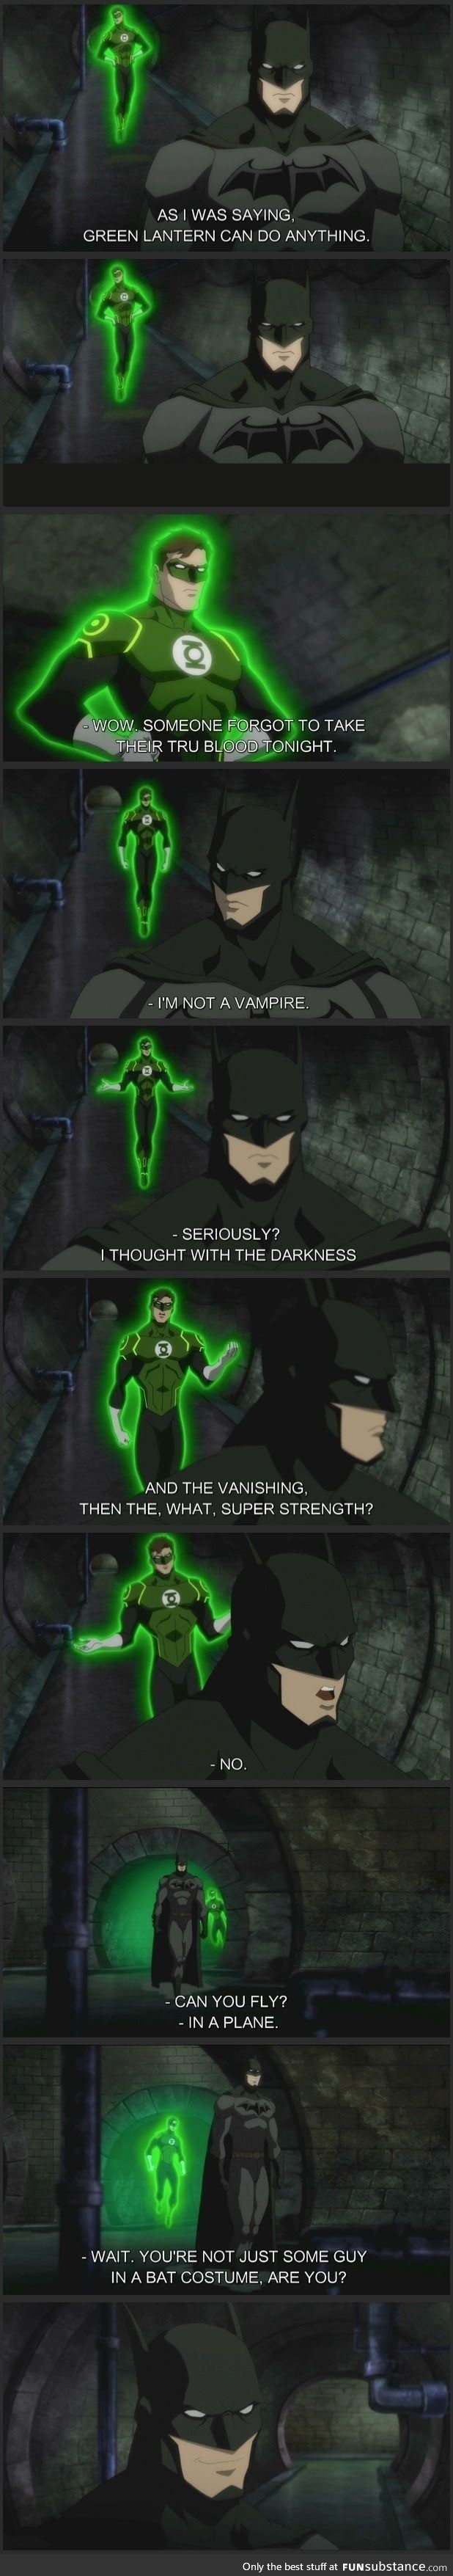 Green Lantern discovers who Batman really is